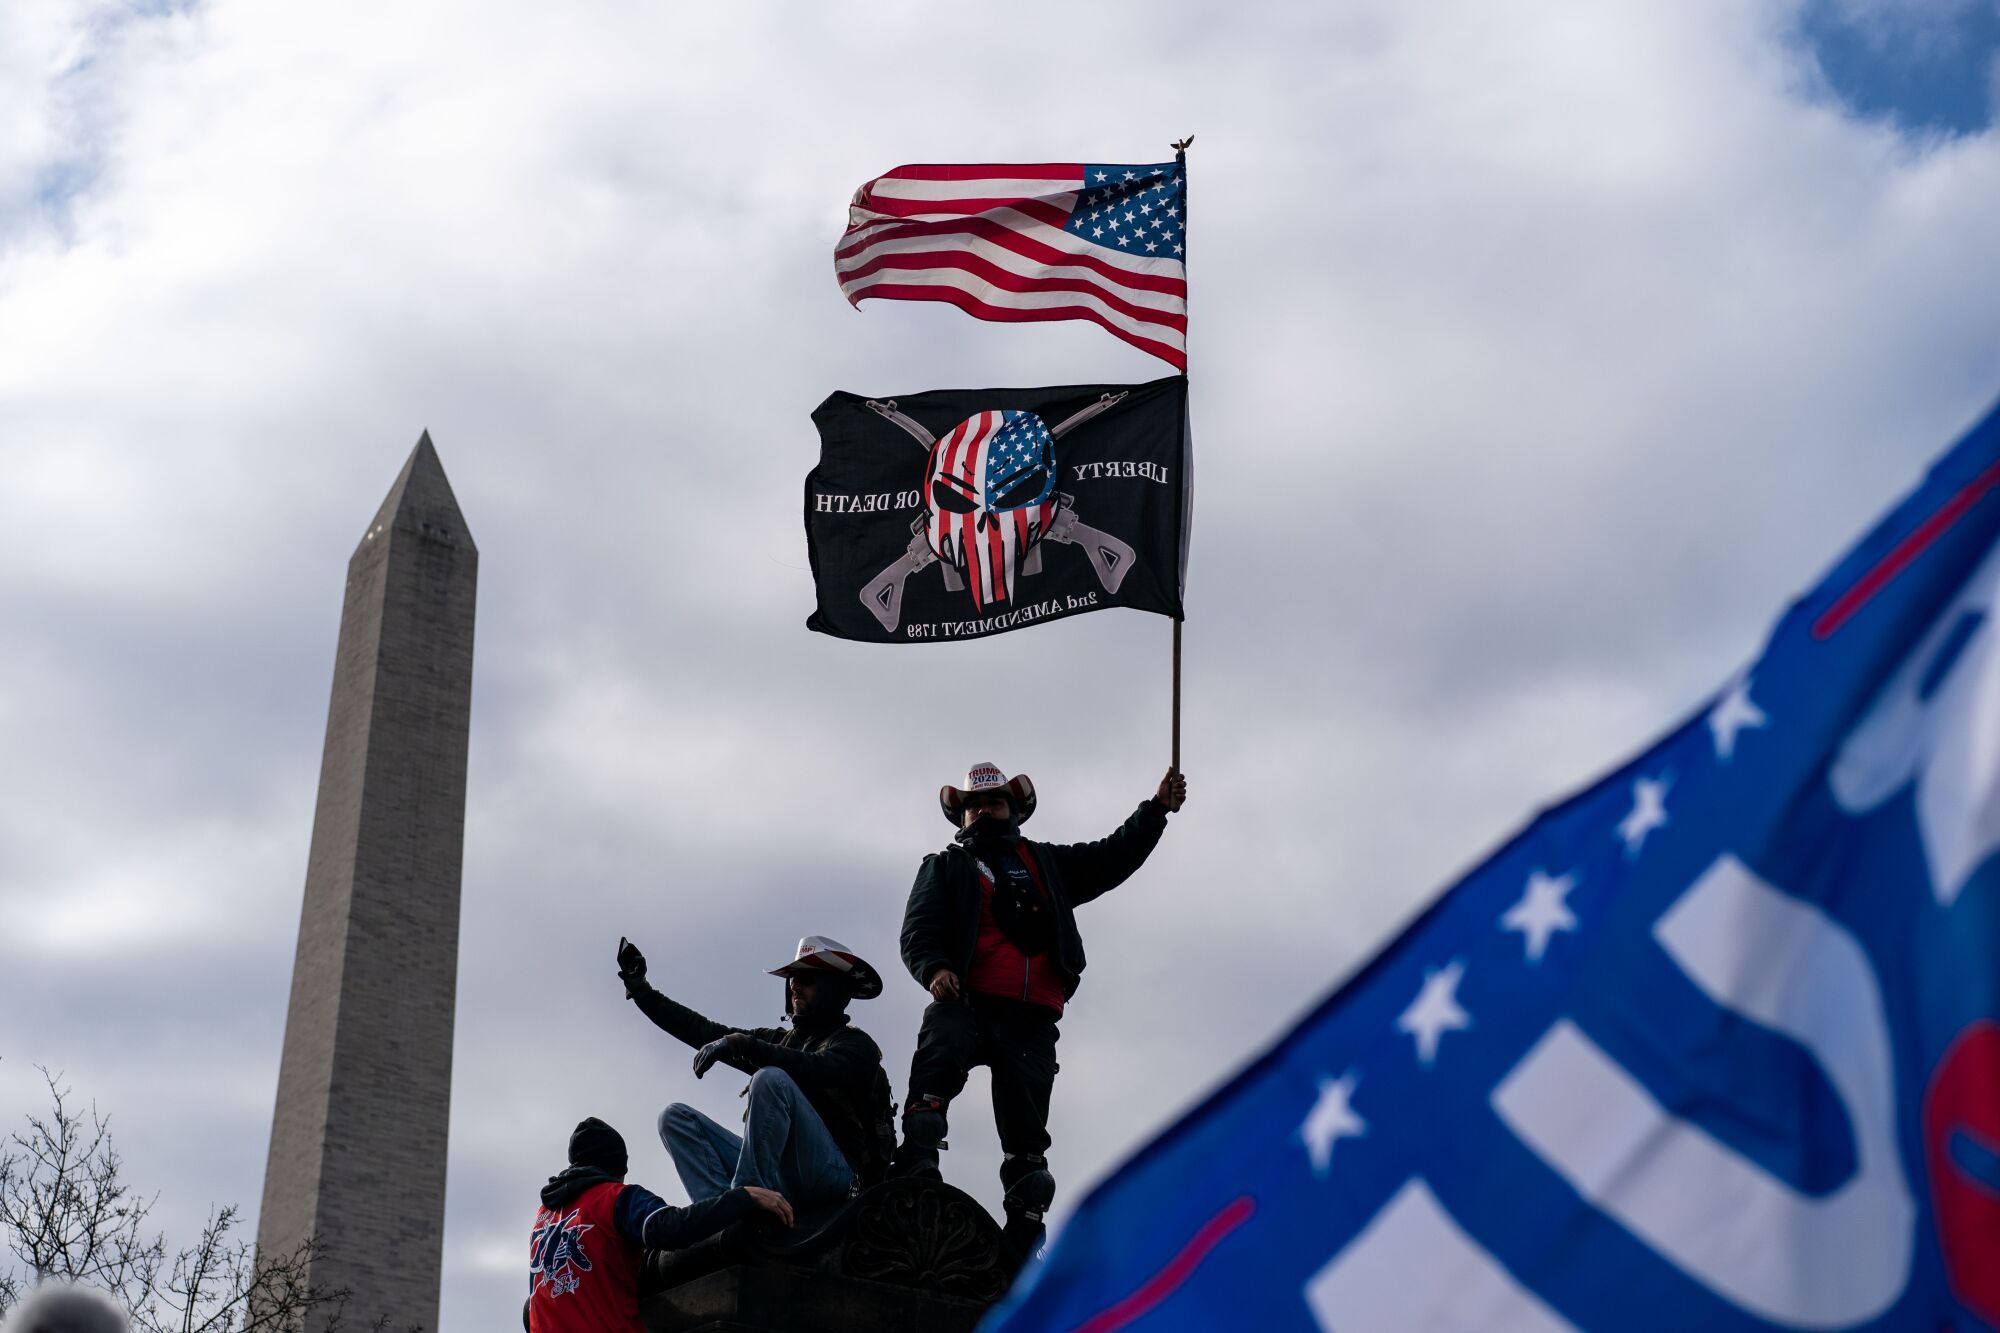 Donald Trump supporters hold flags and take a selfie with the Washington Monument in the background